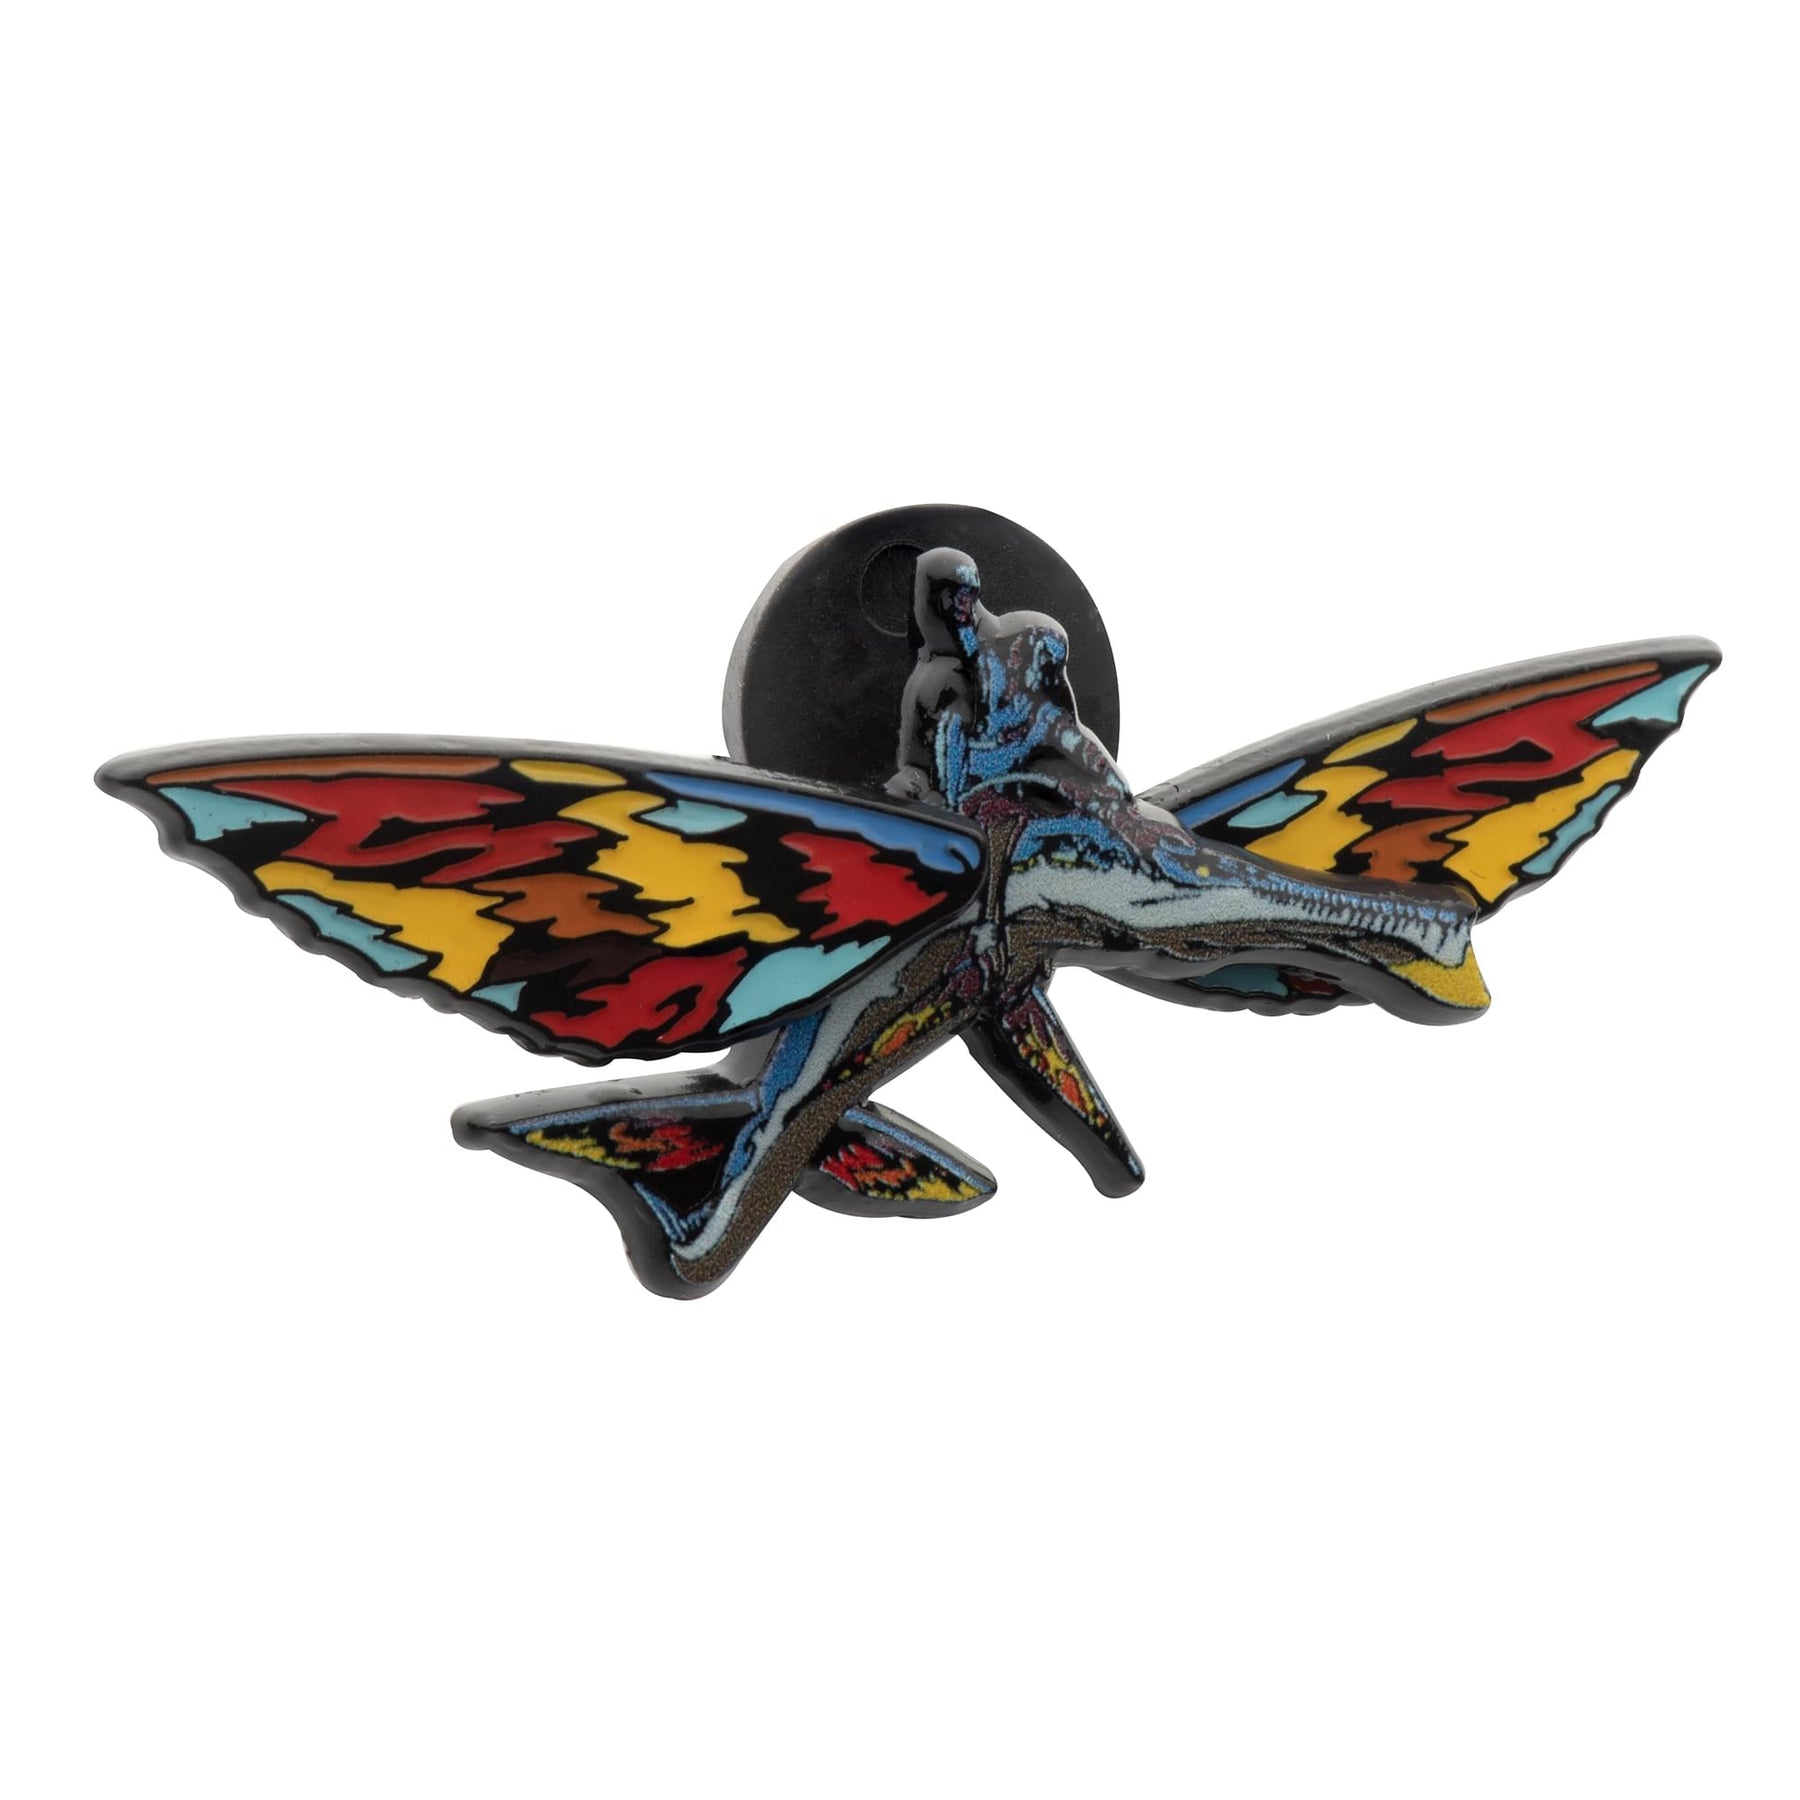 Avatar 2: The Way of Water Skimwing and Rider Moving Enamel Pin